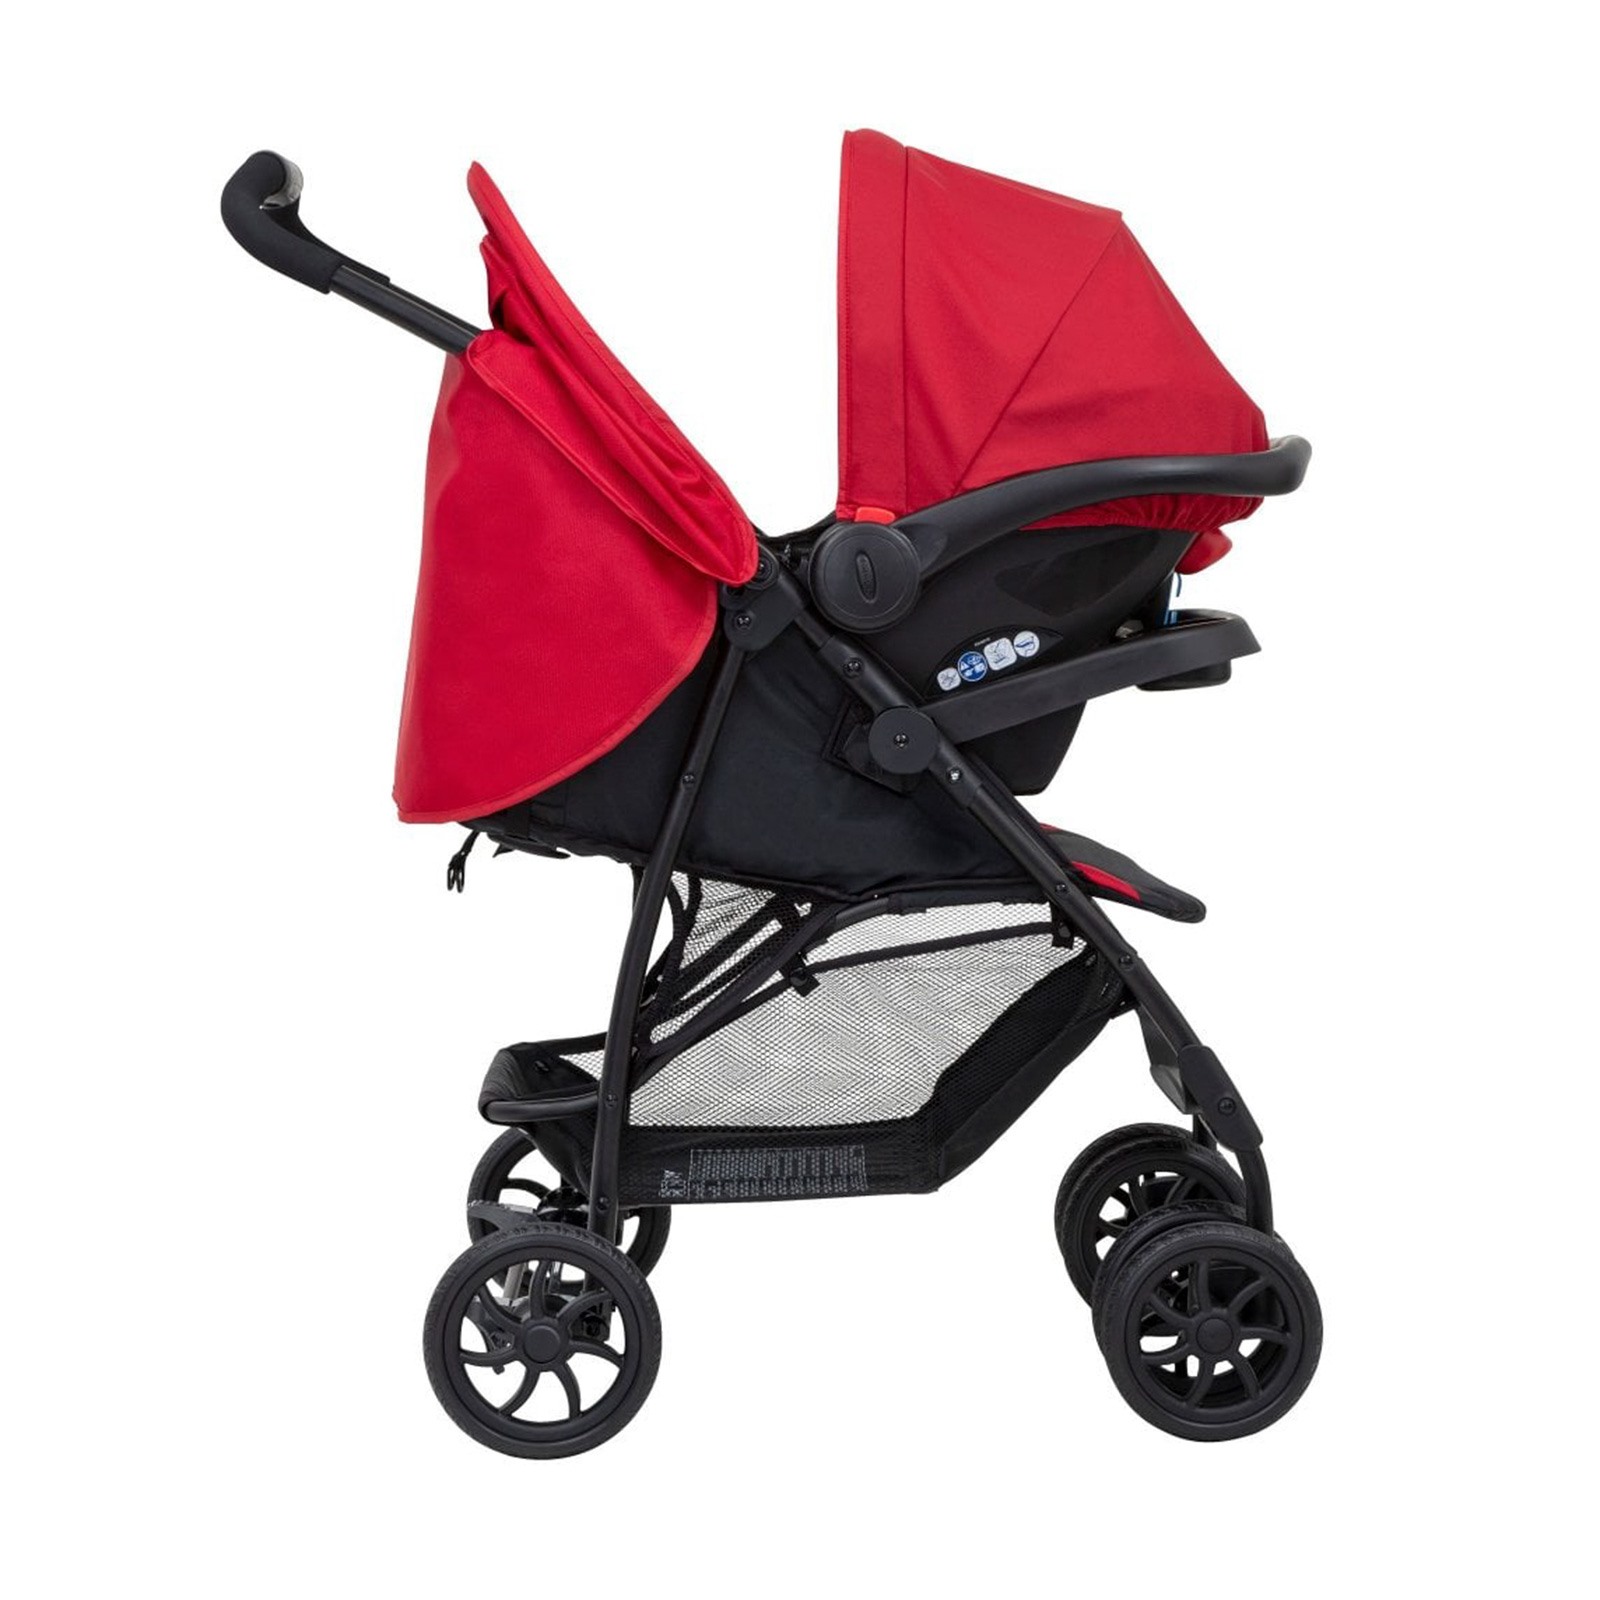 graco mirage stroller review